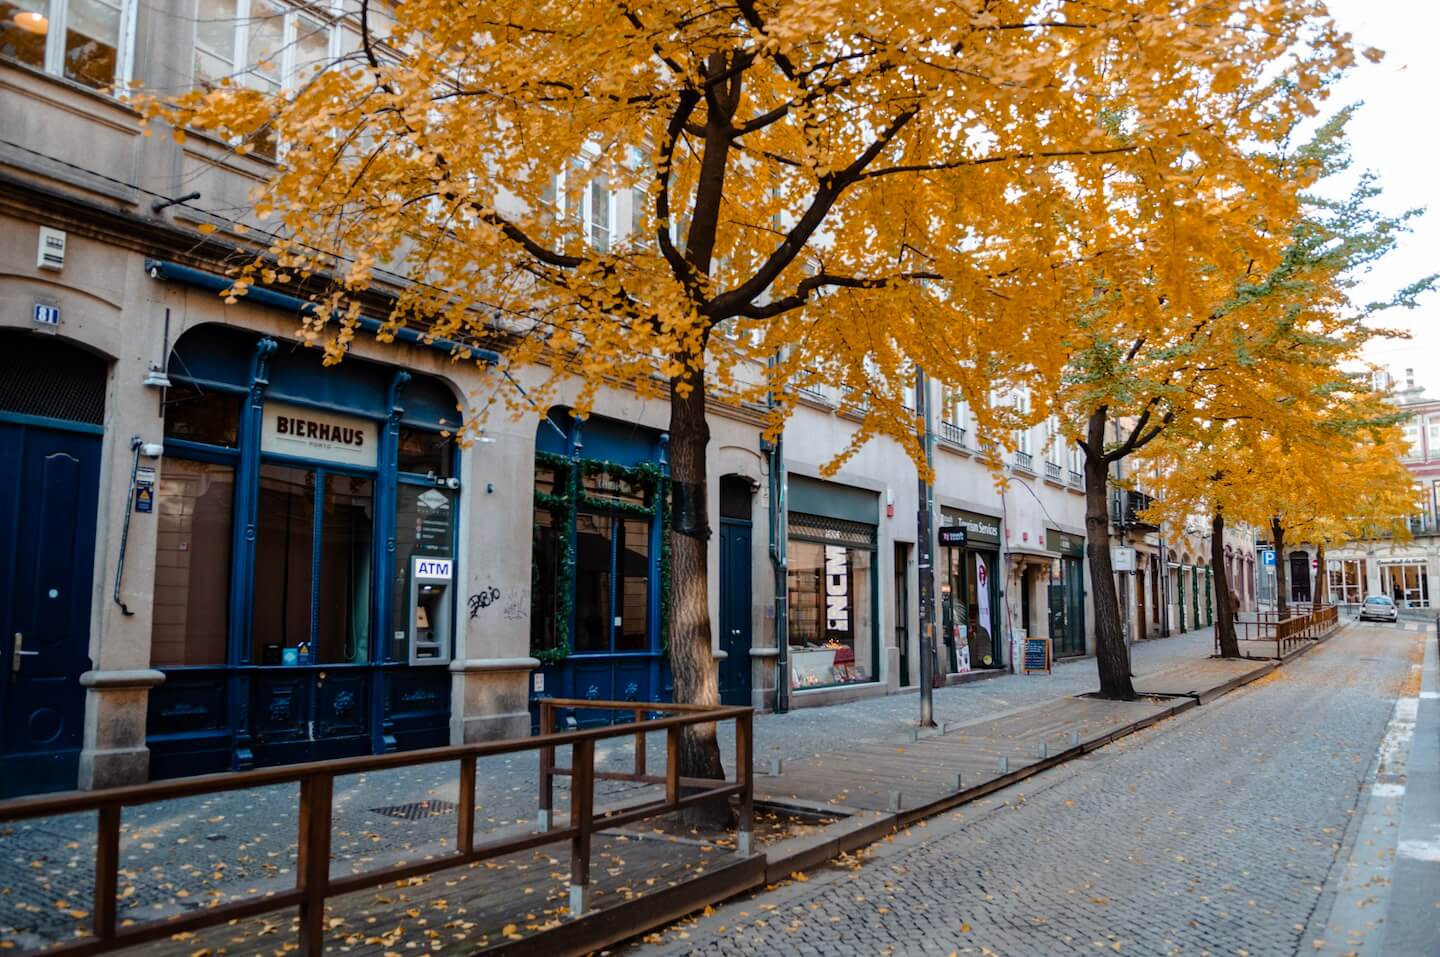 Porto during fall with yellow leave trees.